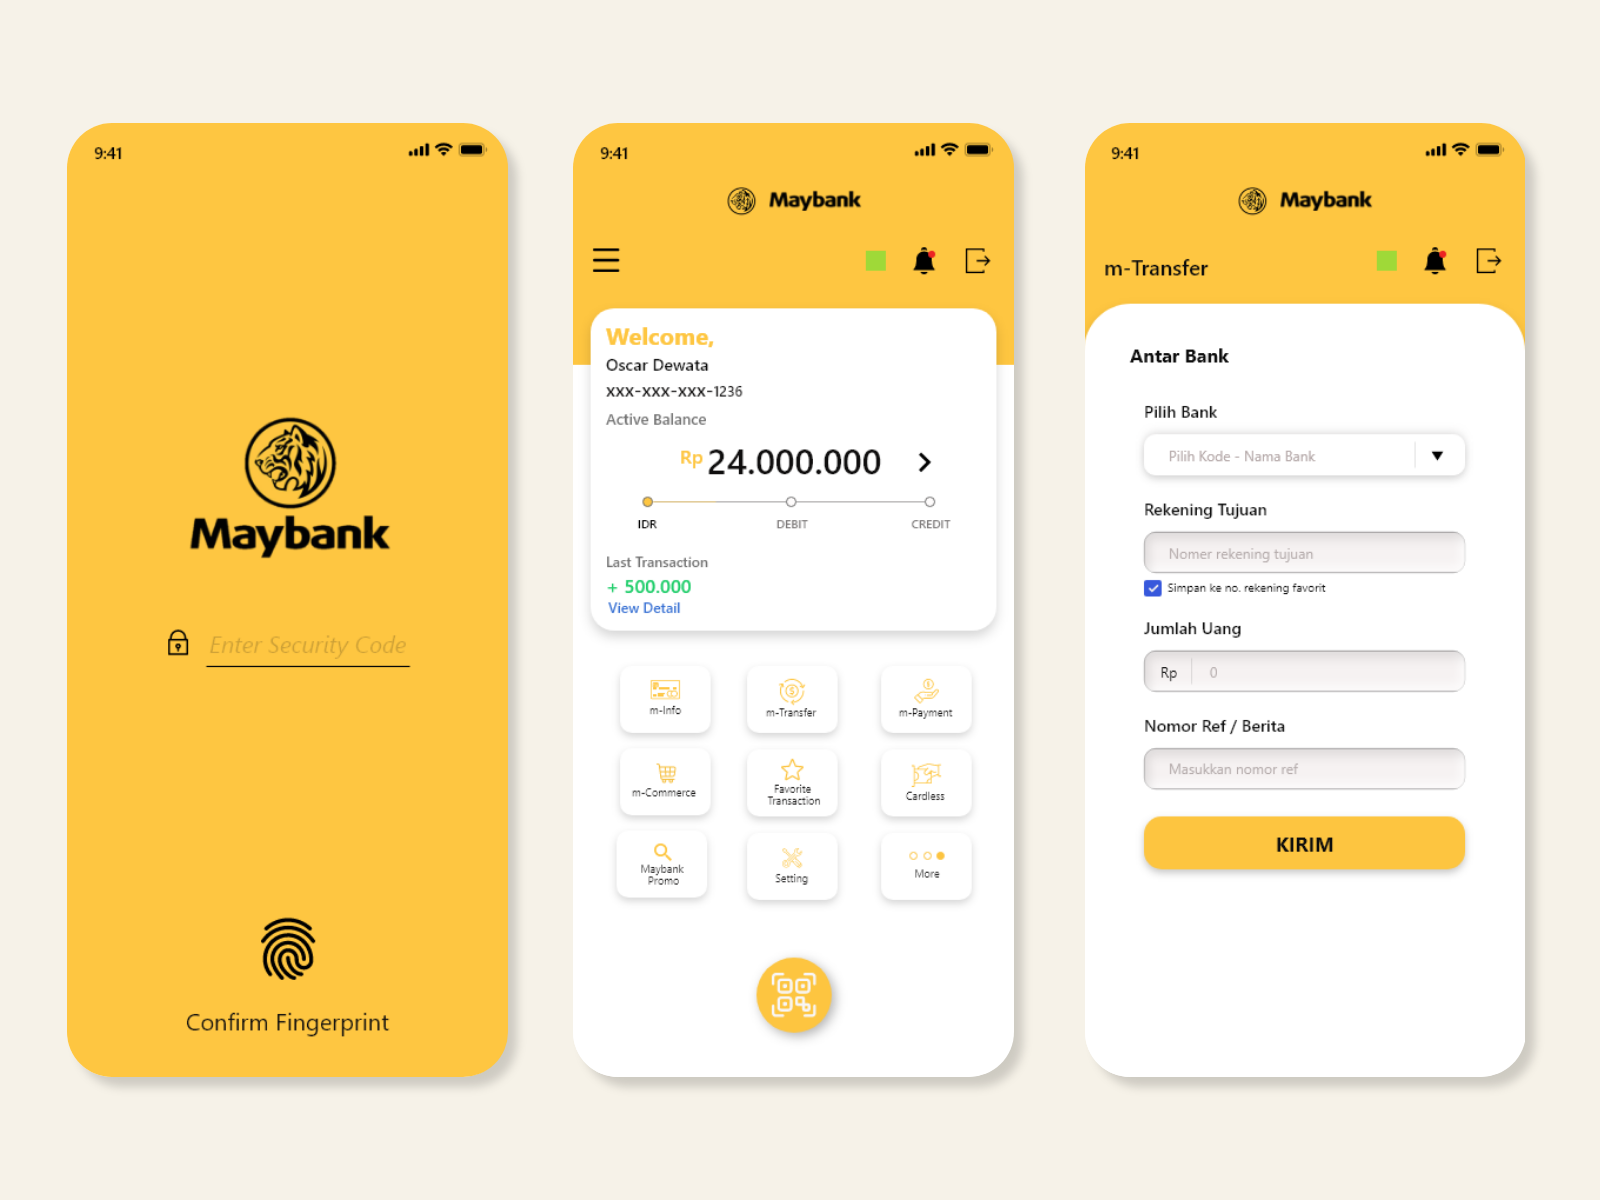 How to add favourite account in maybank